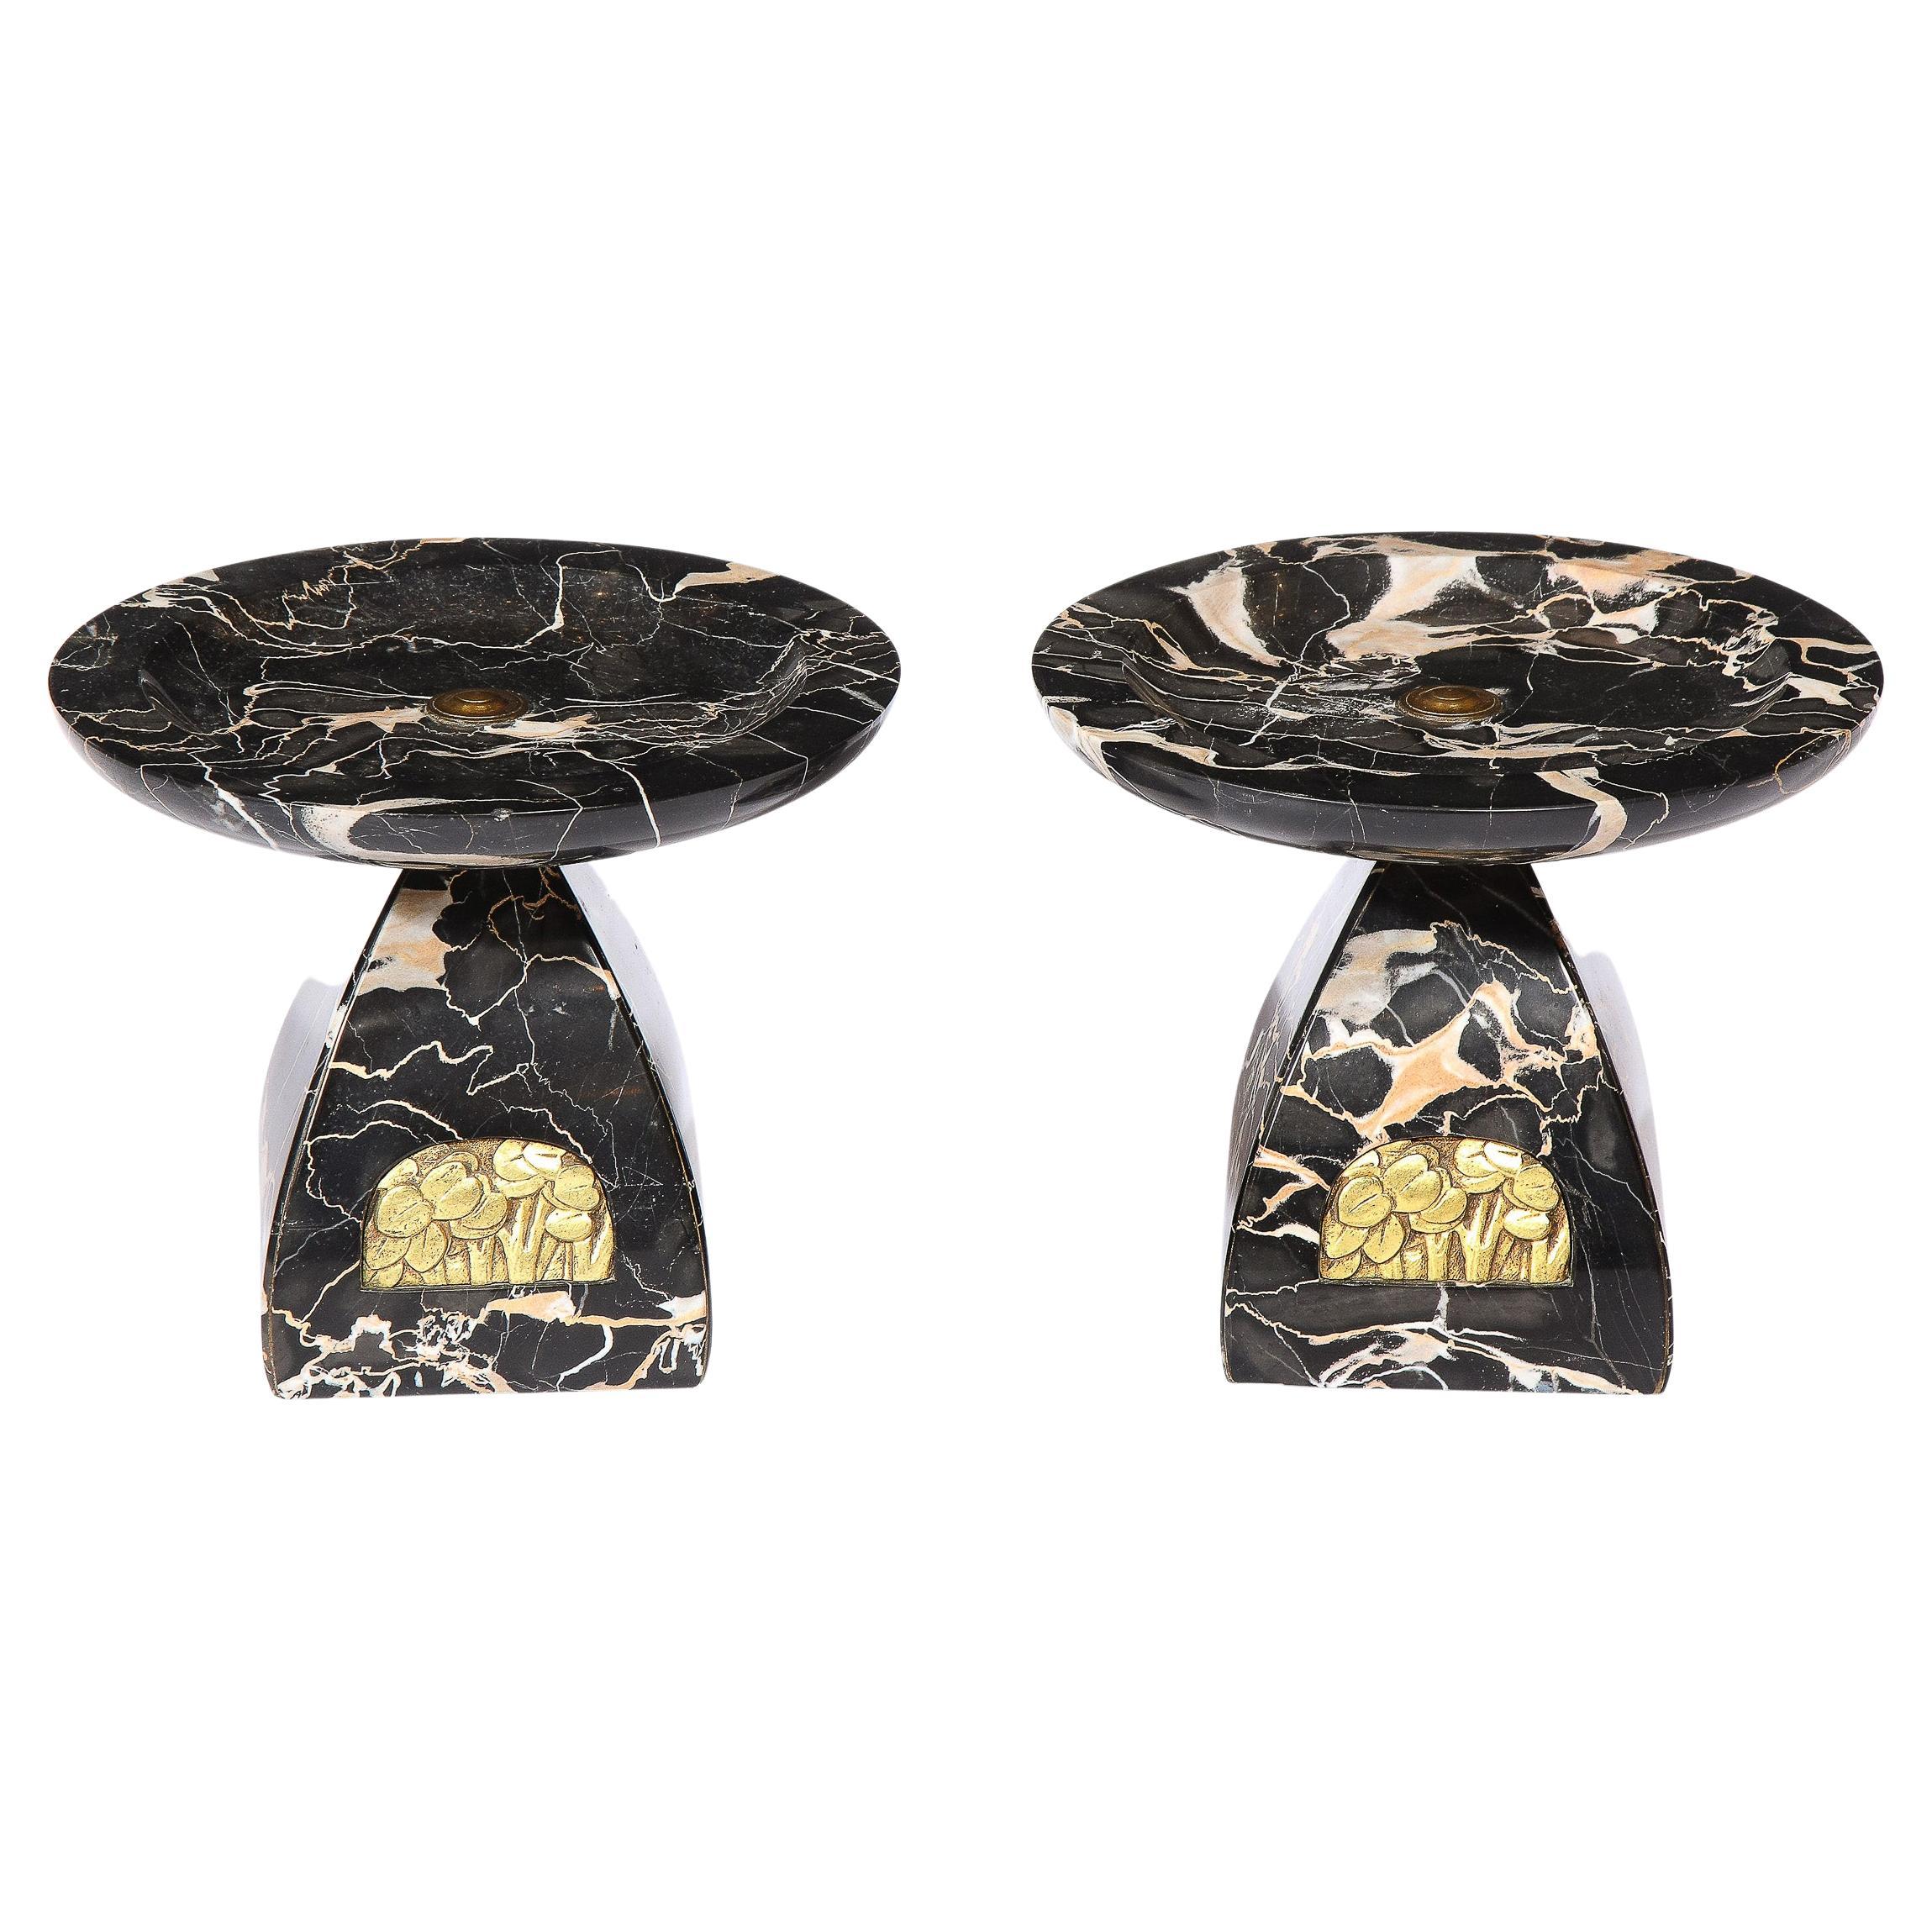 Pair of French High Style Art Deco Exotic Marble Tazzas with Foliate Detailing